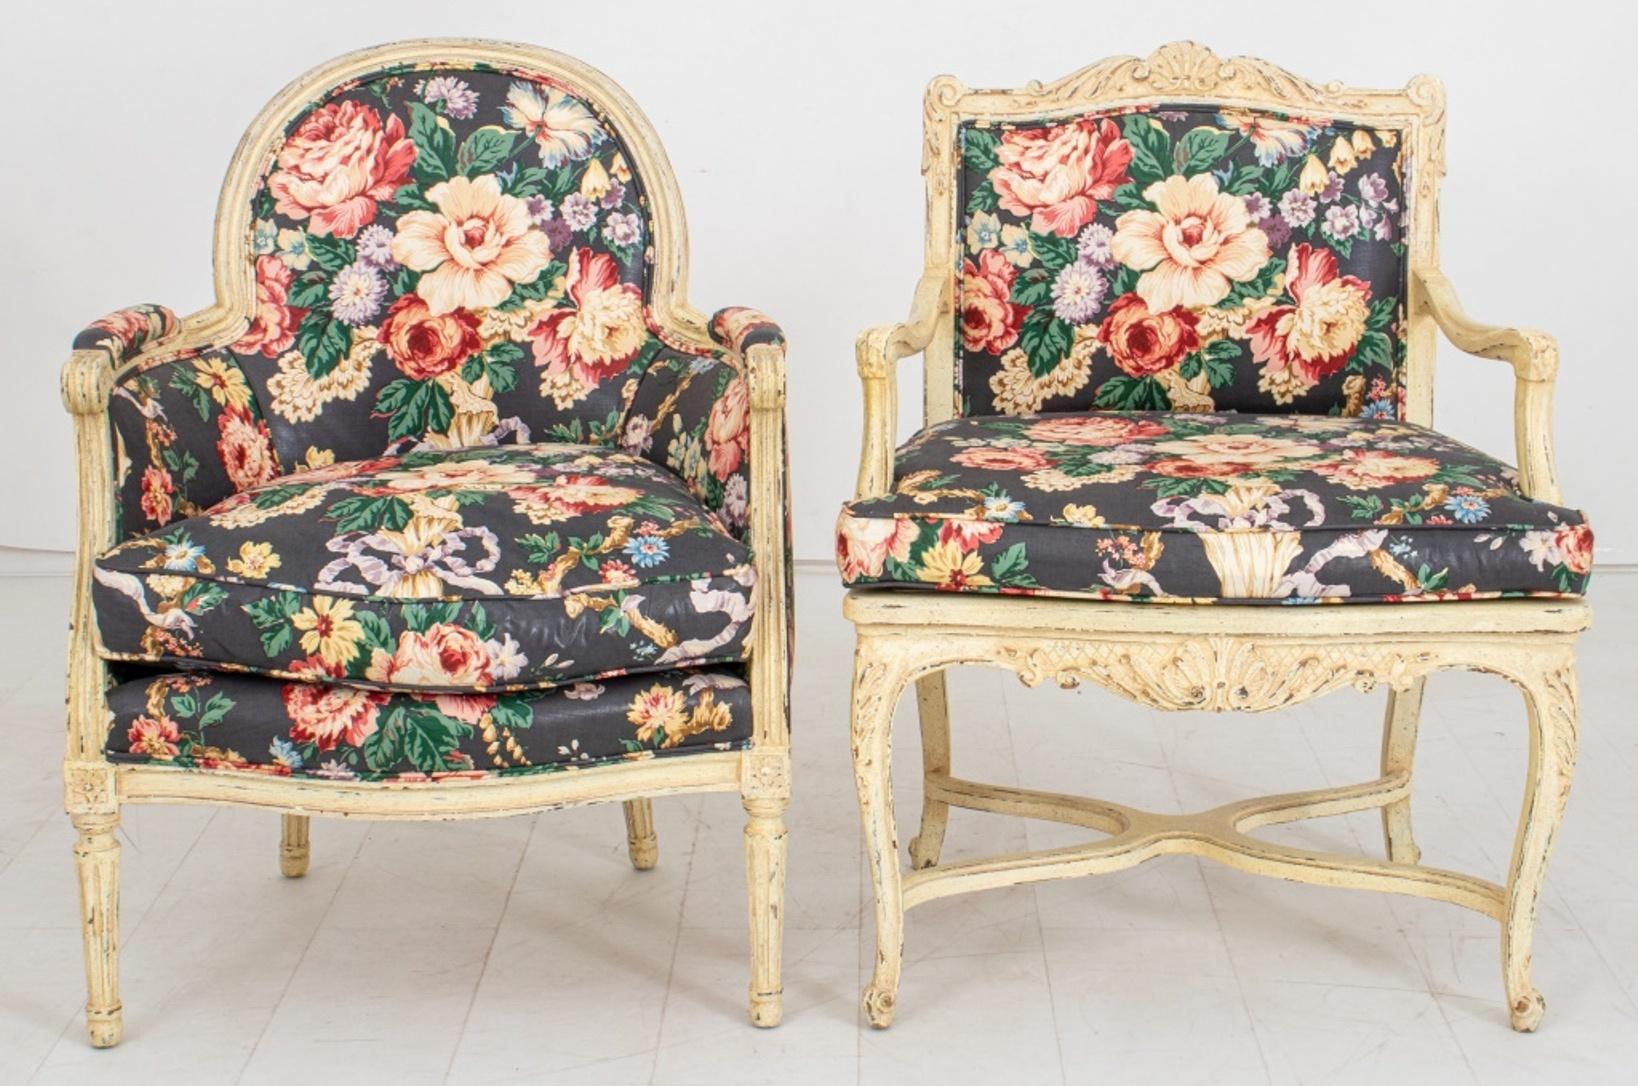 Group of French Neoclassical style seating comprising two armchairs and one footrest, one bergere in the Louis XVI taste with ovoid seat back and one rectangular in the Louis XIV manner, with carved painted wood frames and floral motif